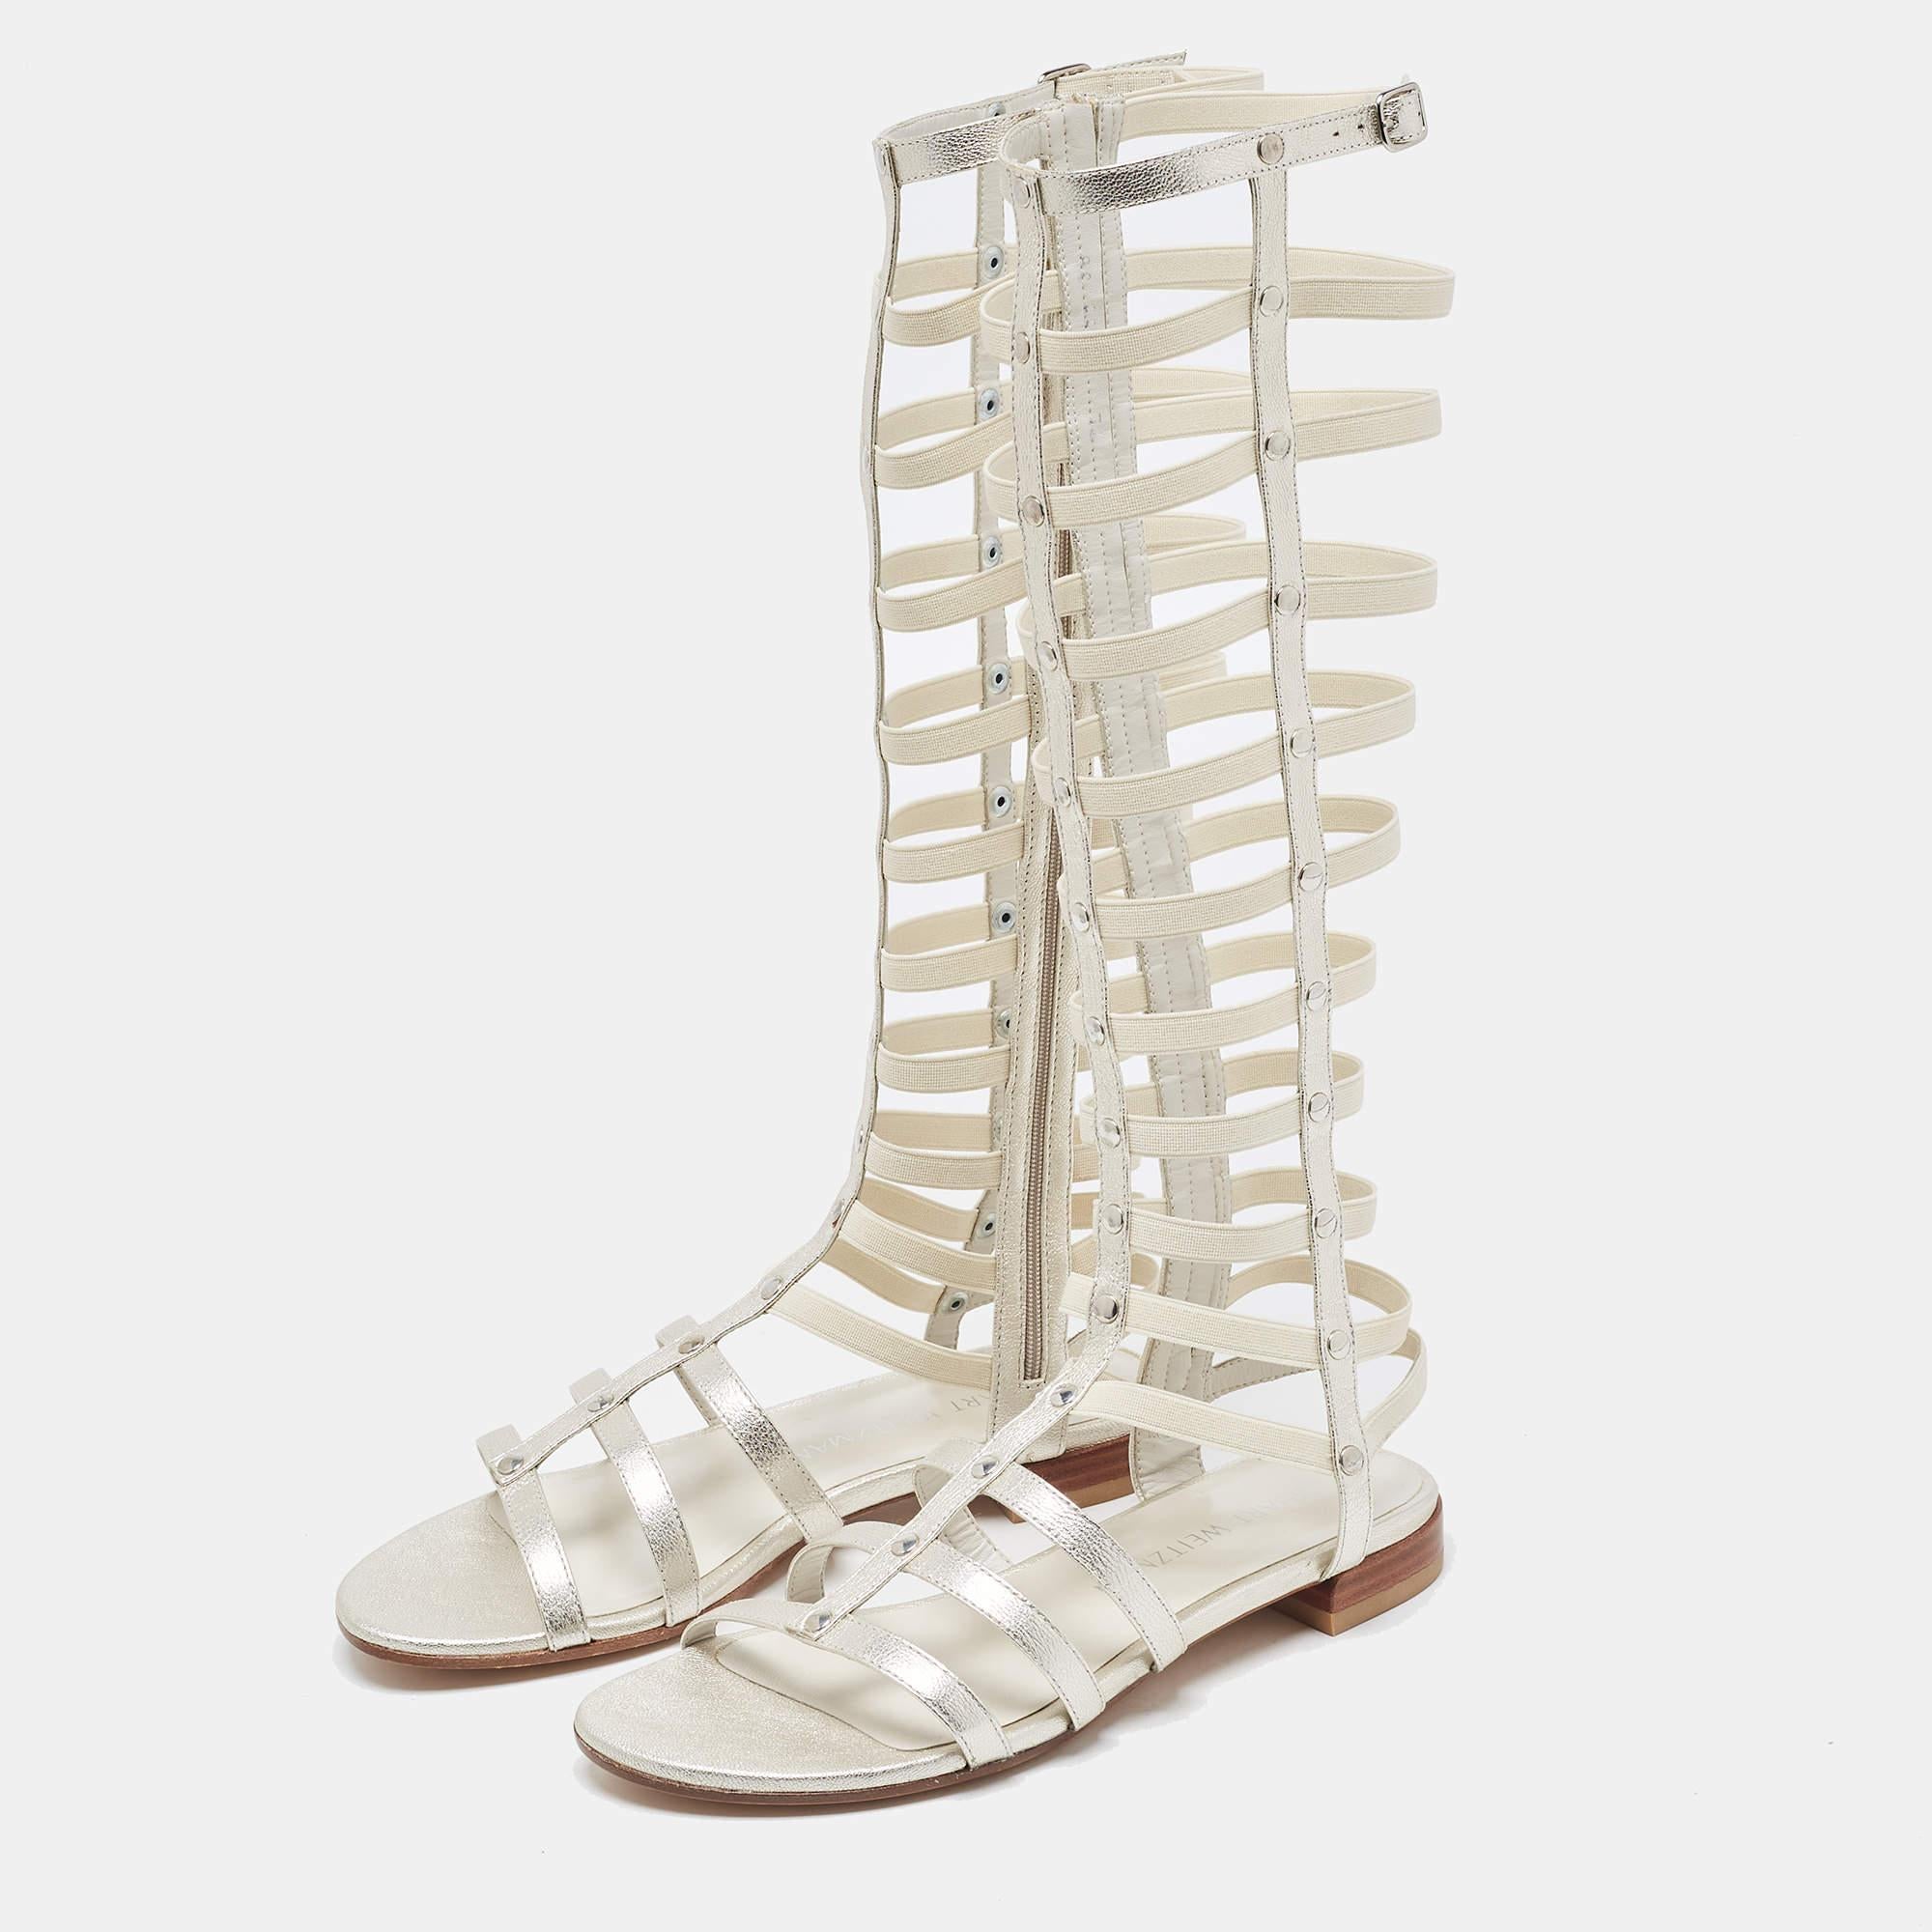 Stuart Weitzman Silver Leather And Elastic Gladiator Flat Sandals Size 36 For Sale 3